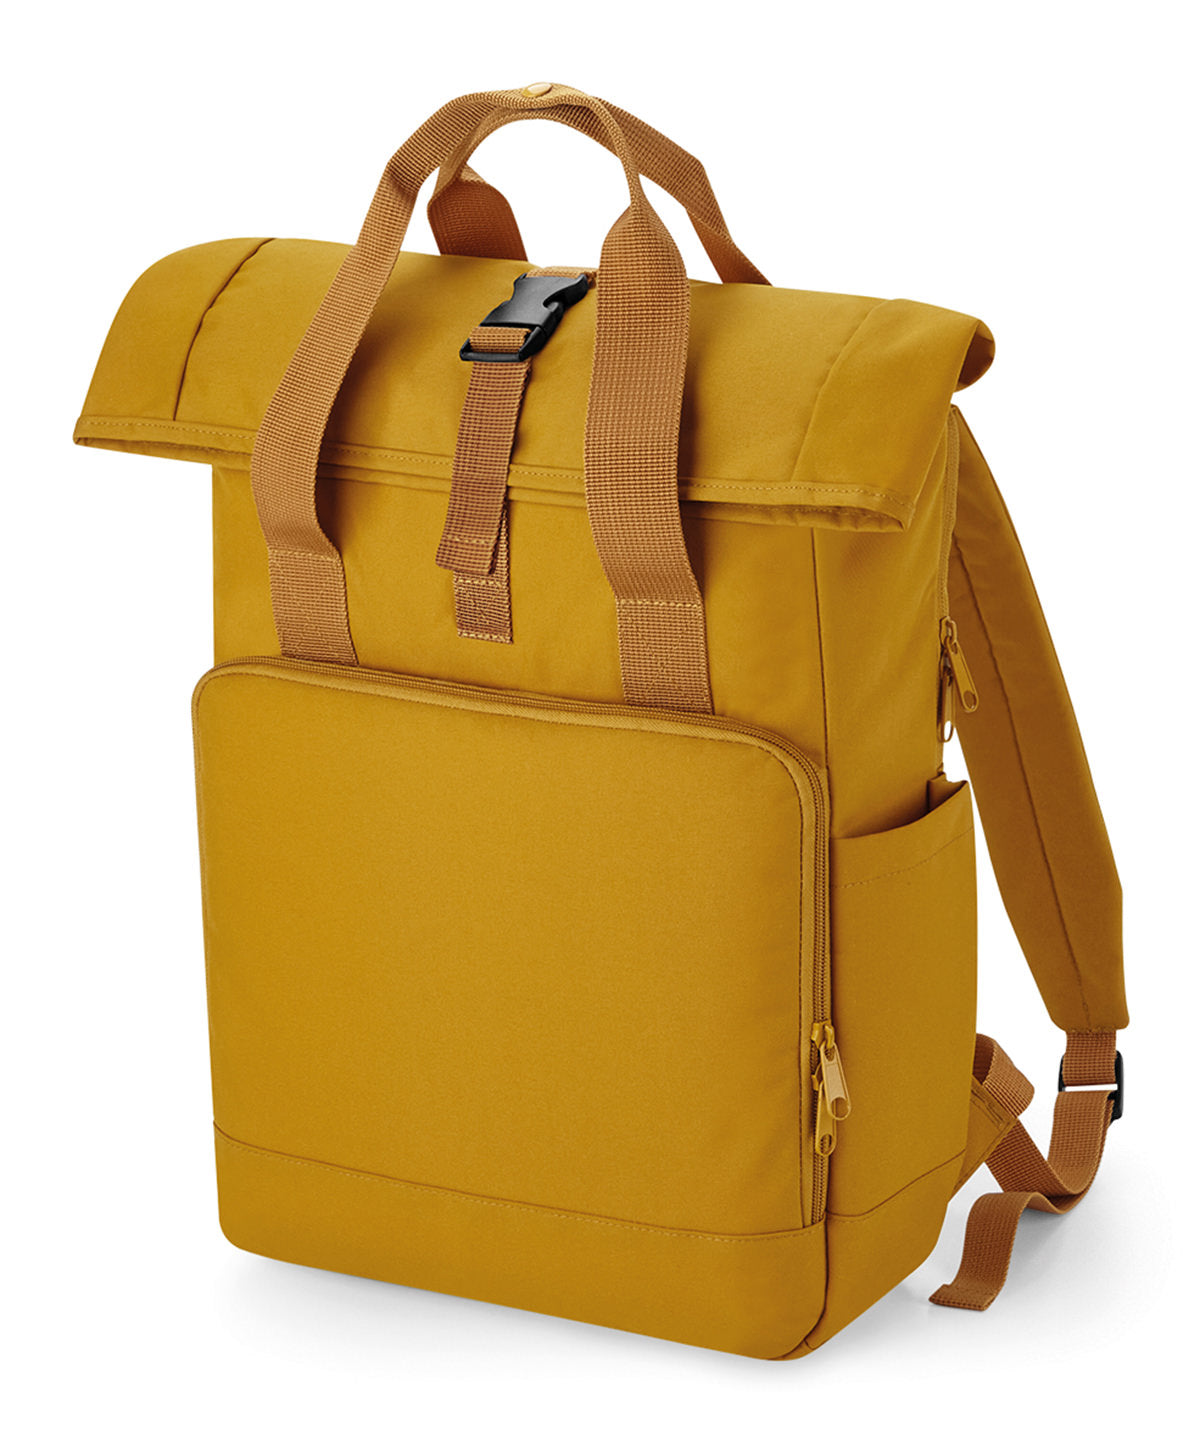 Recycled twin handle roll-top laptop backpack